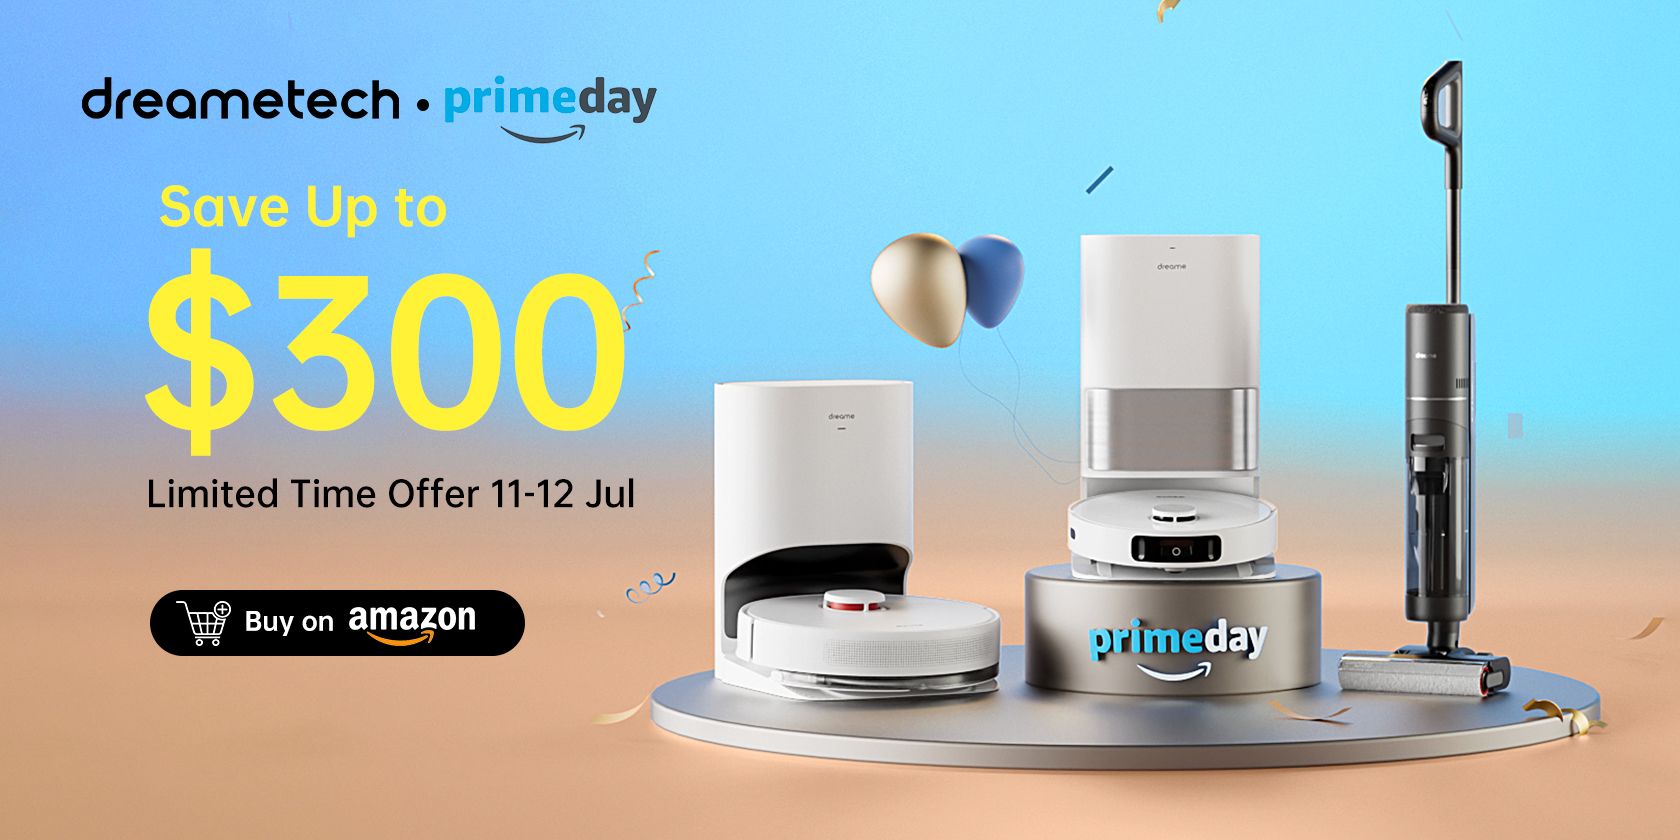 Dreametech hero image for Prime Day special